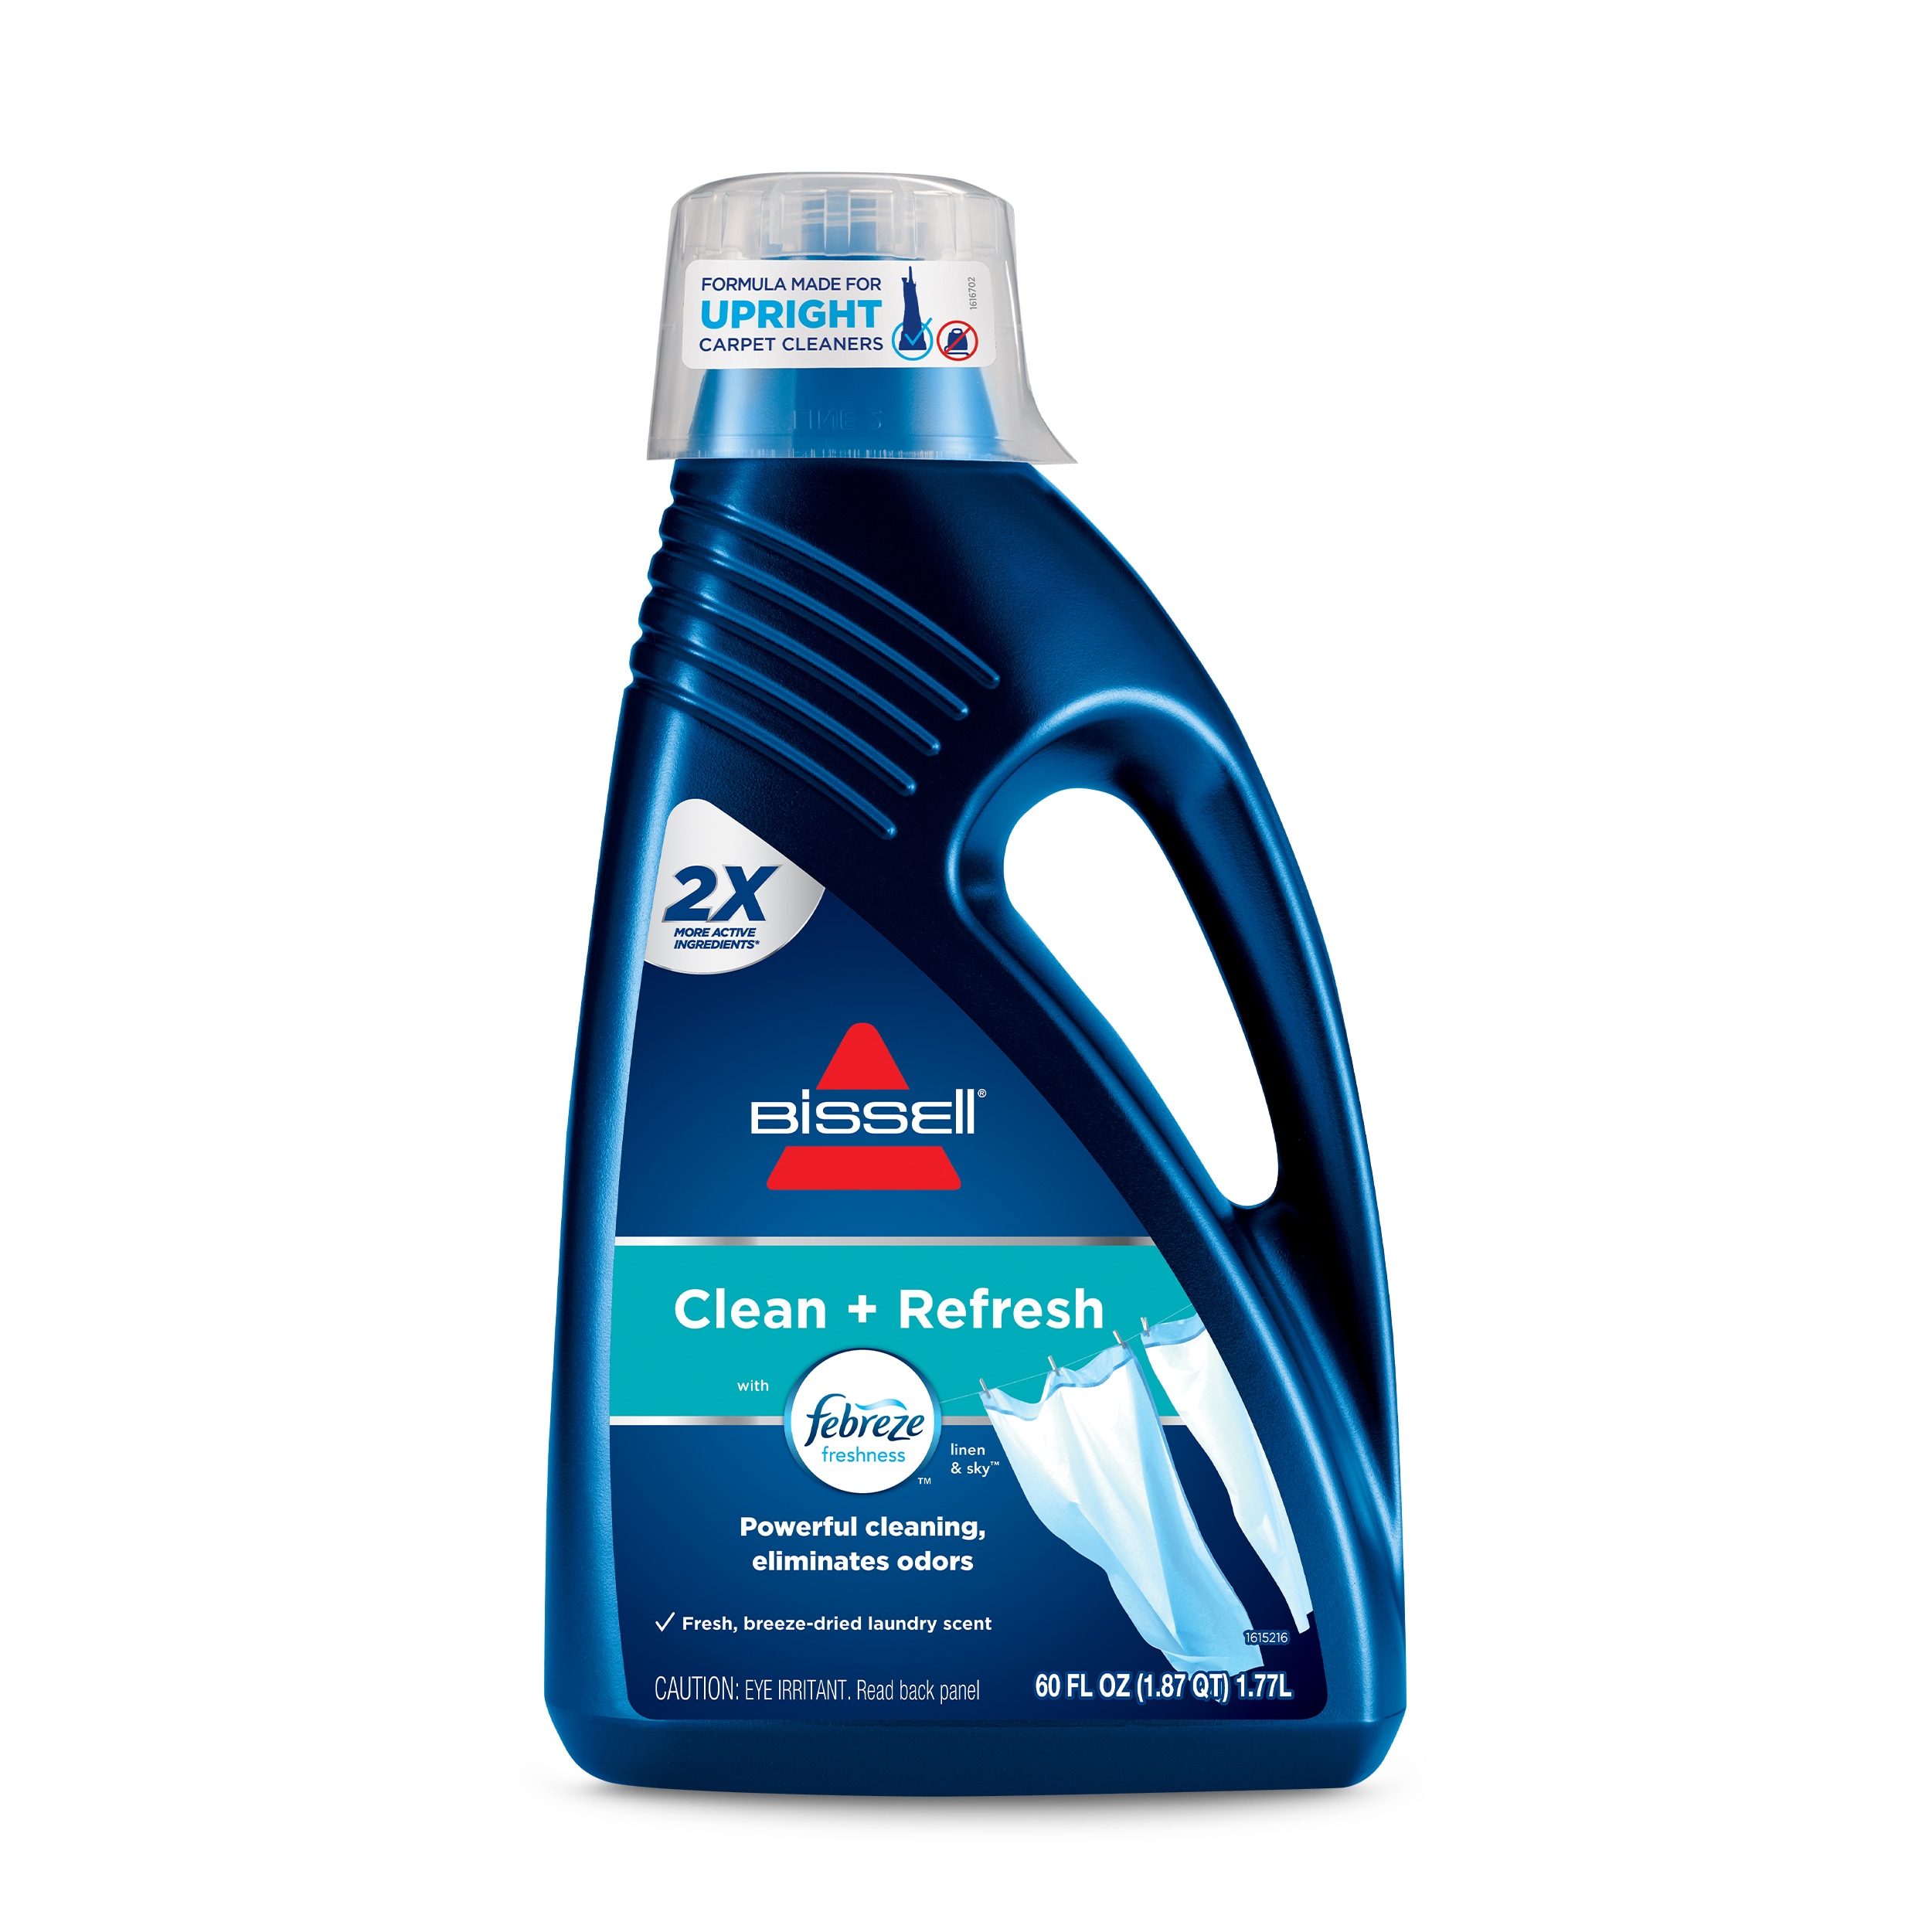 Shop BISSELL TurboClean DualPro Pet Carpet Cleaner with 60-fl oz Clean +  Refresh with Febreze Steam Cleaner Chemical at